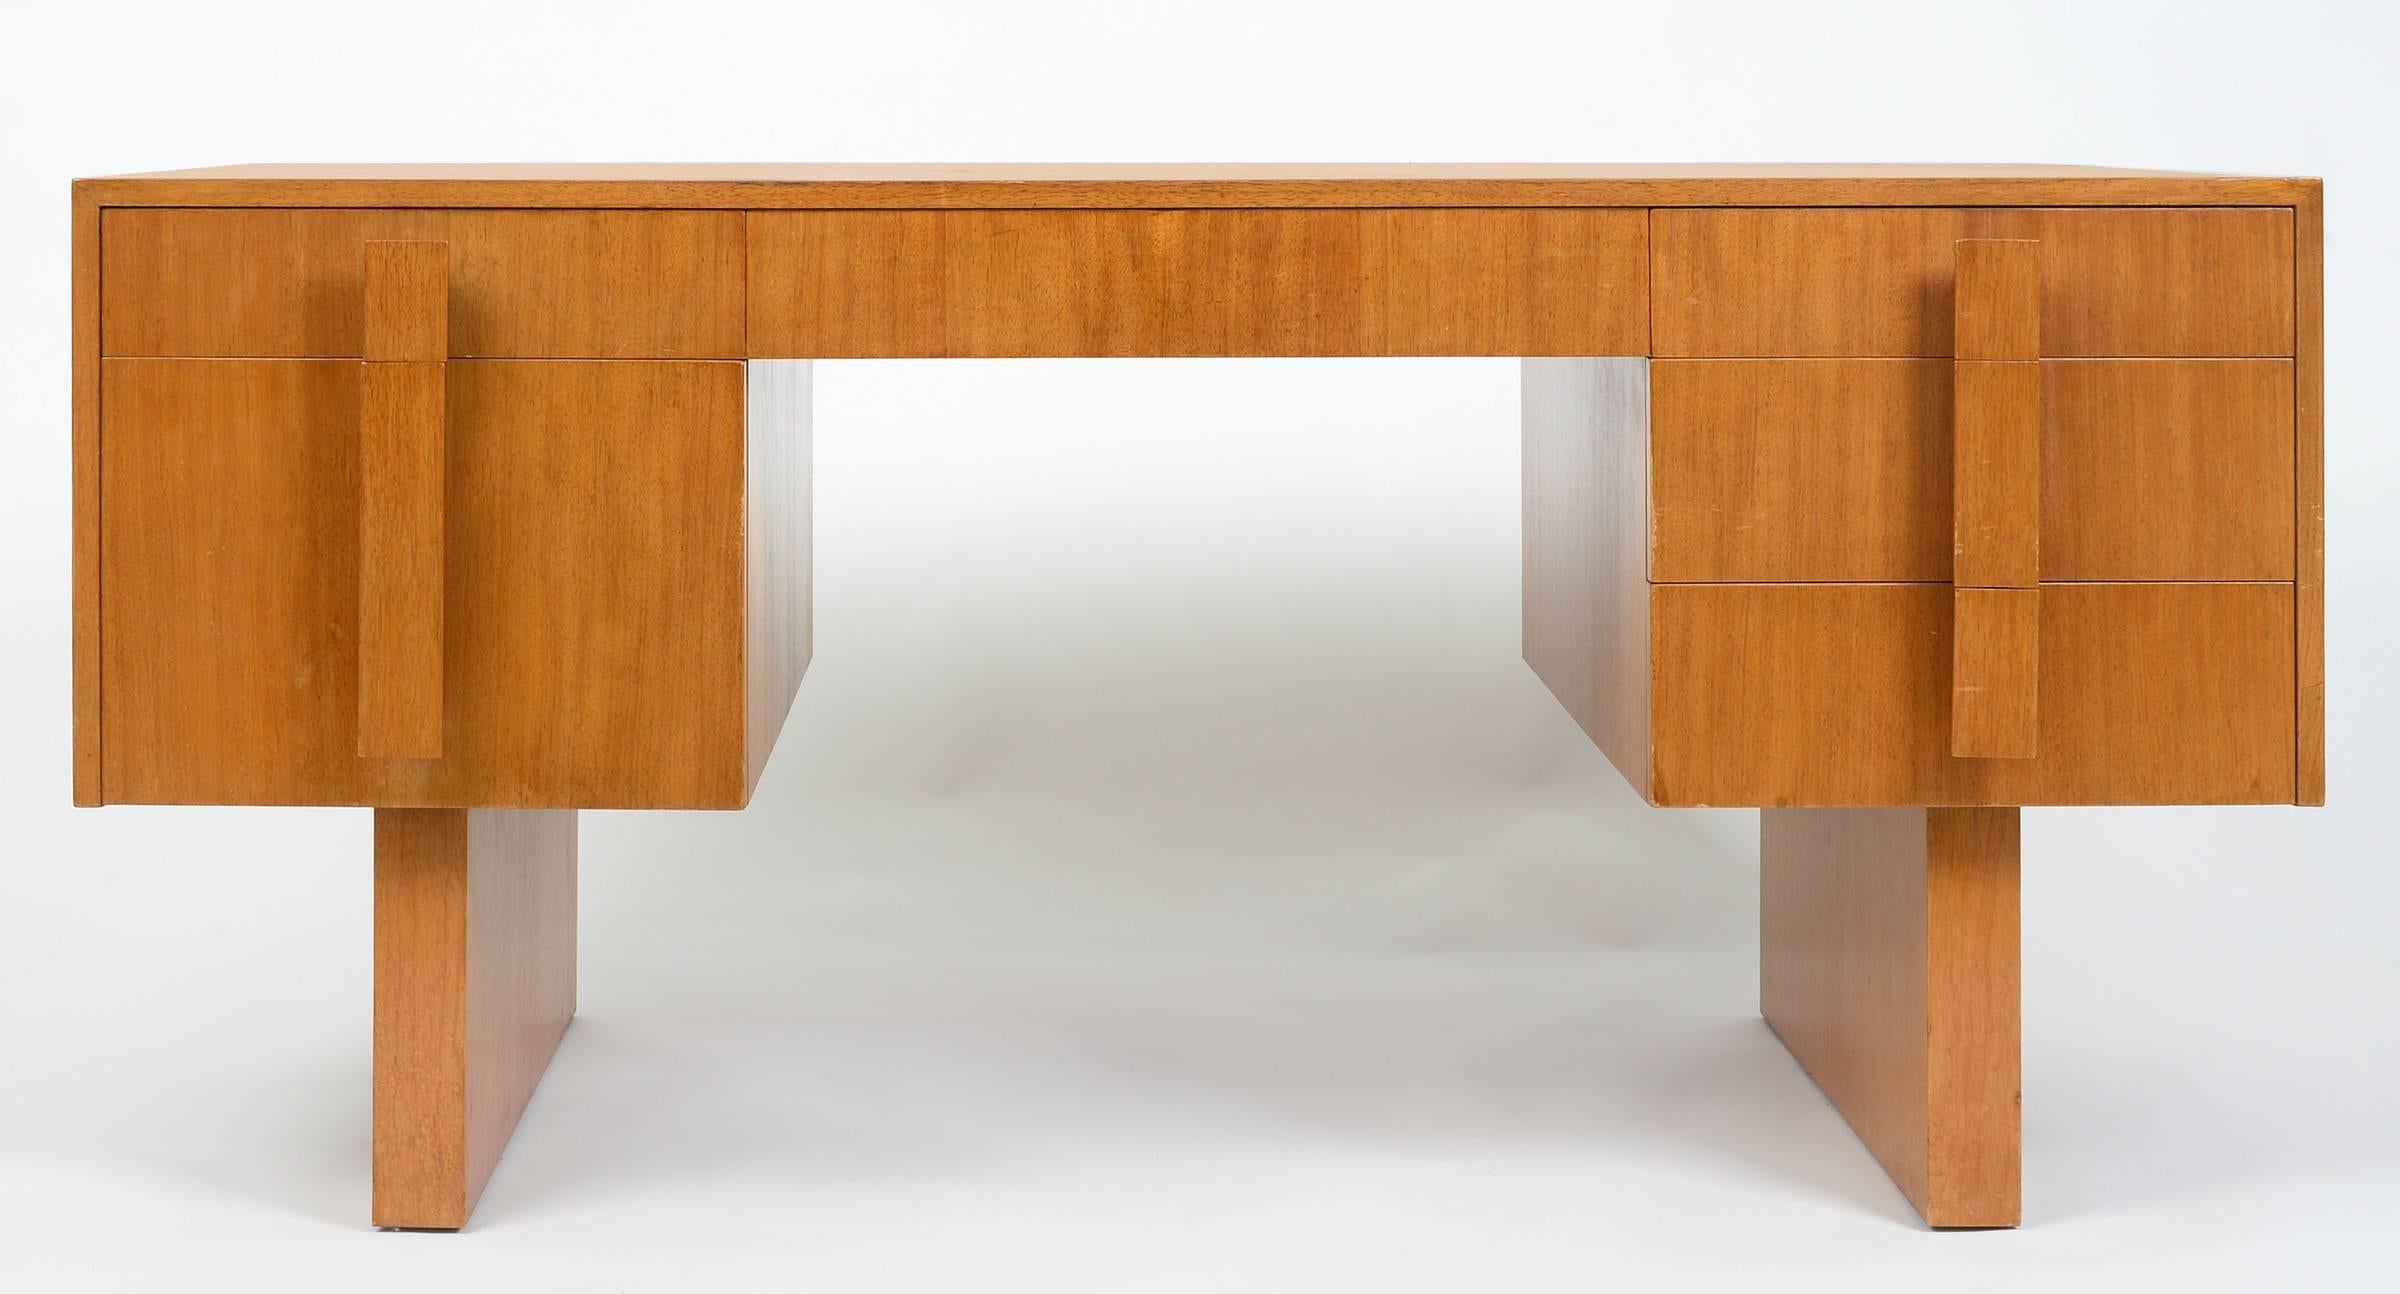 You are viewing a seldom seen VK Desk from the NYC showroom of Kagan-Dreyfuss, circa 1953. This desk exudes Cubism with sharp clean edges. The inside as well as the outside has aged beautifully. This desk has two drawers on the left, one center